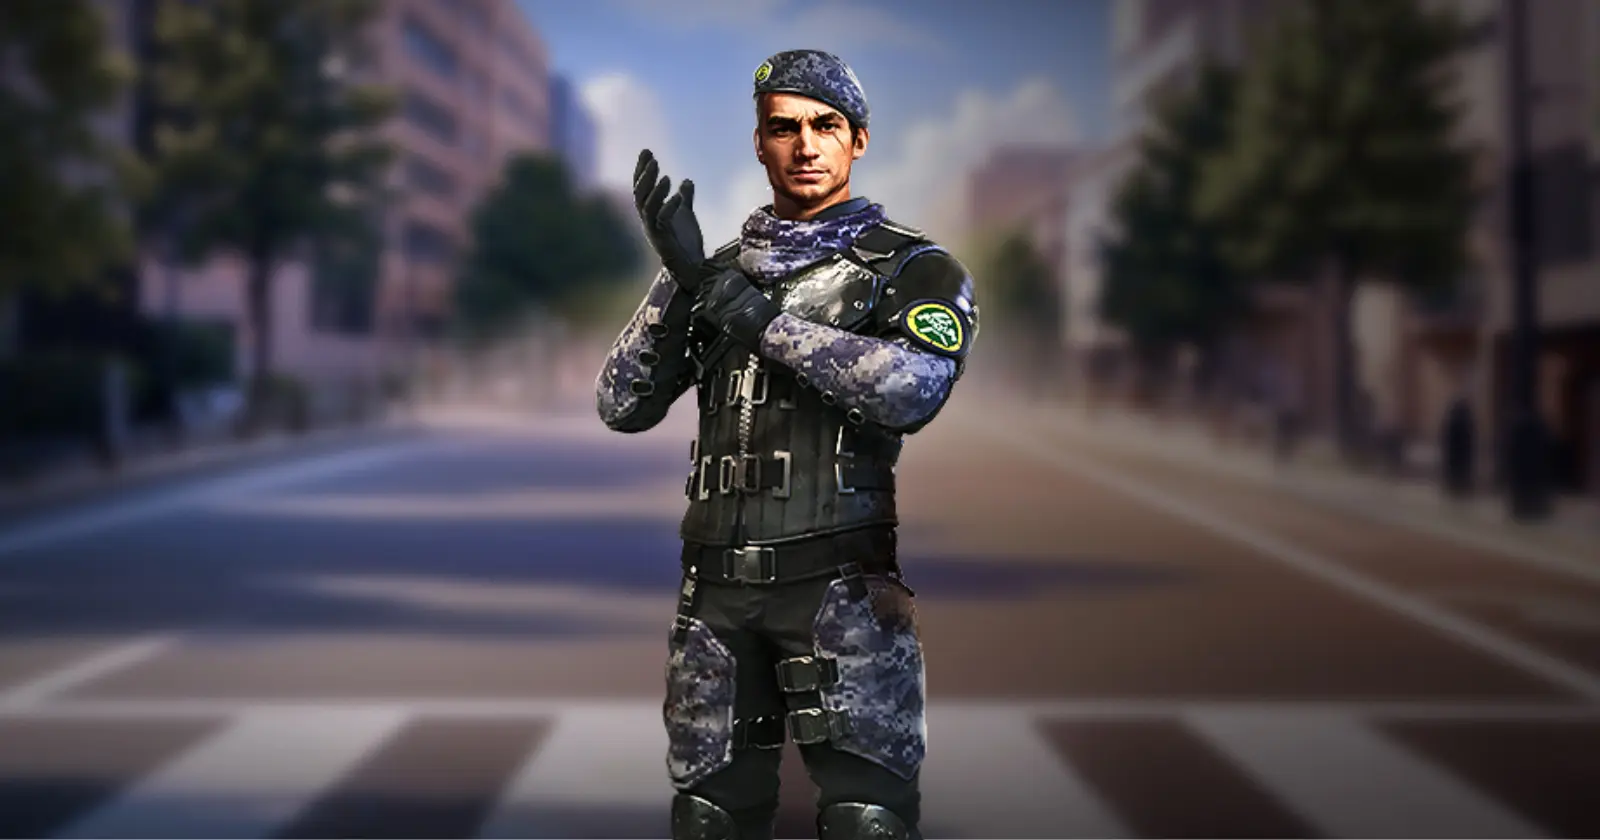 A man named Miguel, dressed in a military uniform, stands on an urban street.